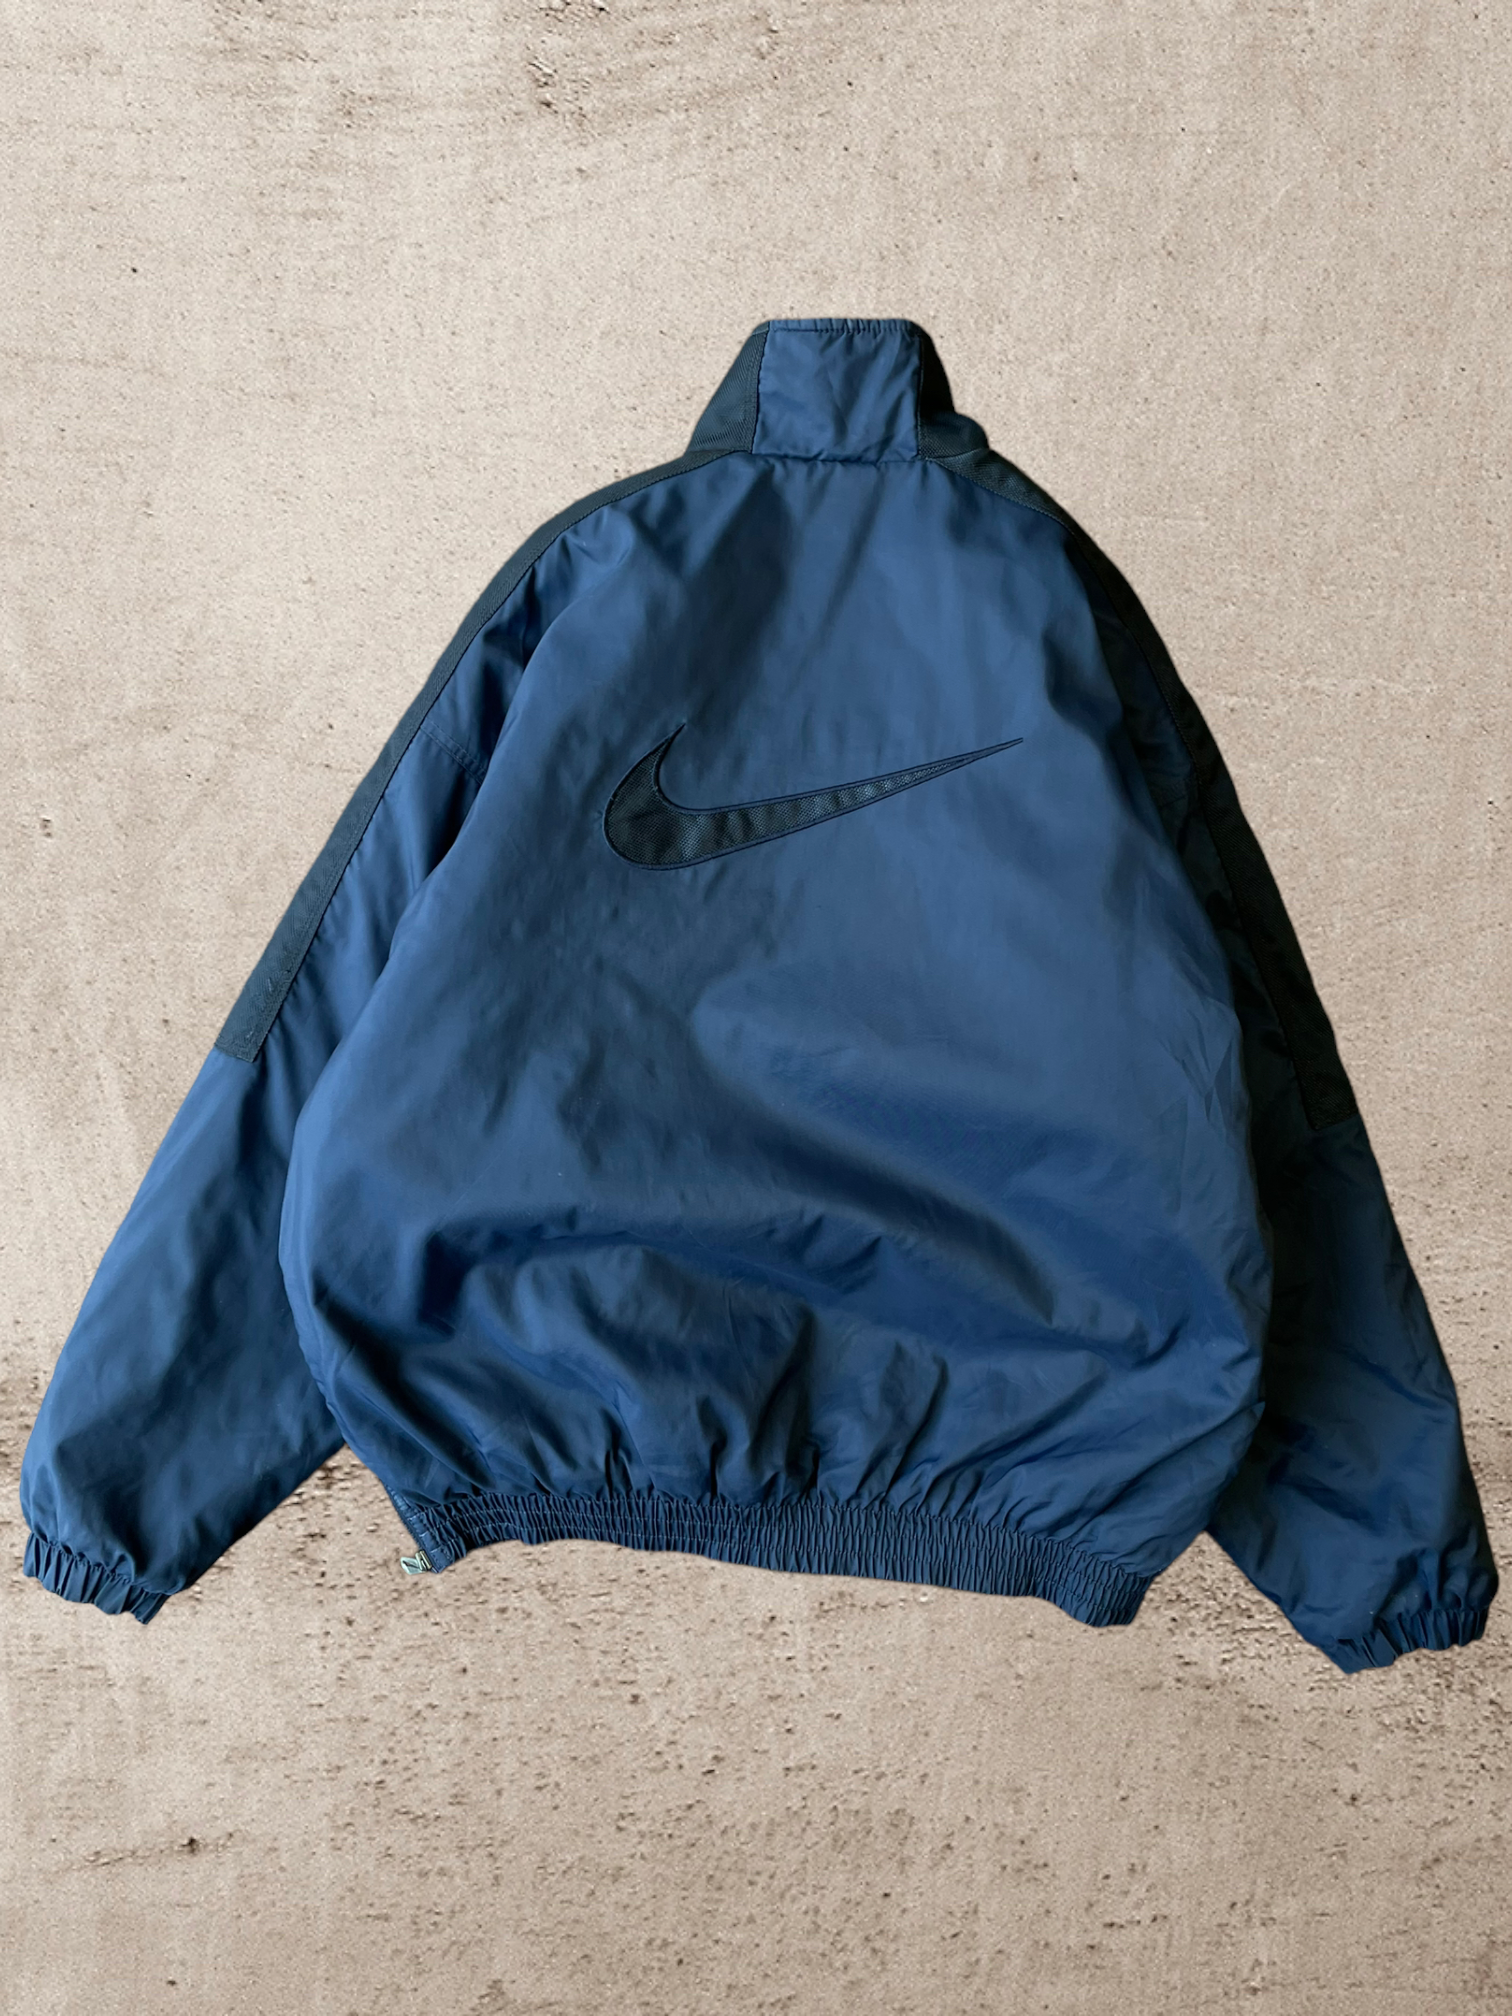 90s Nike Anorak Puffer Quilted Lined Jacket - Large